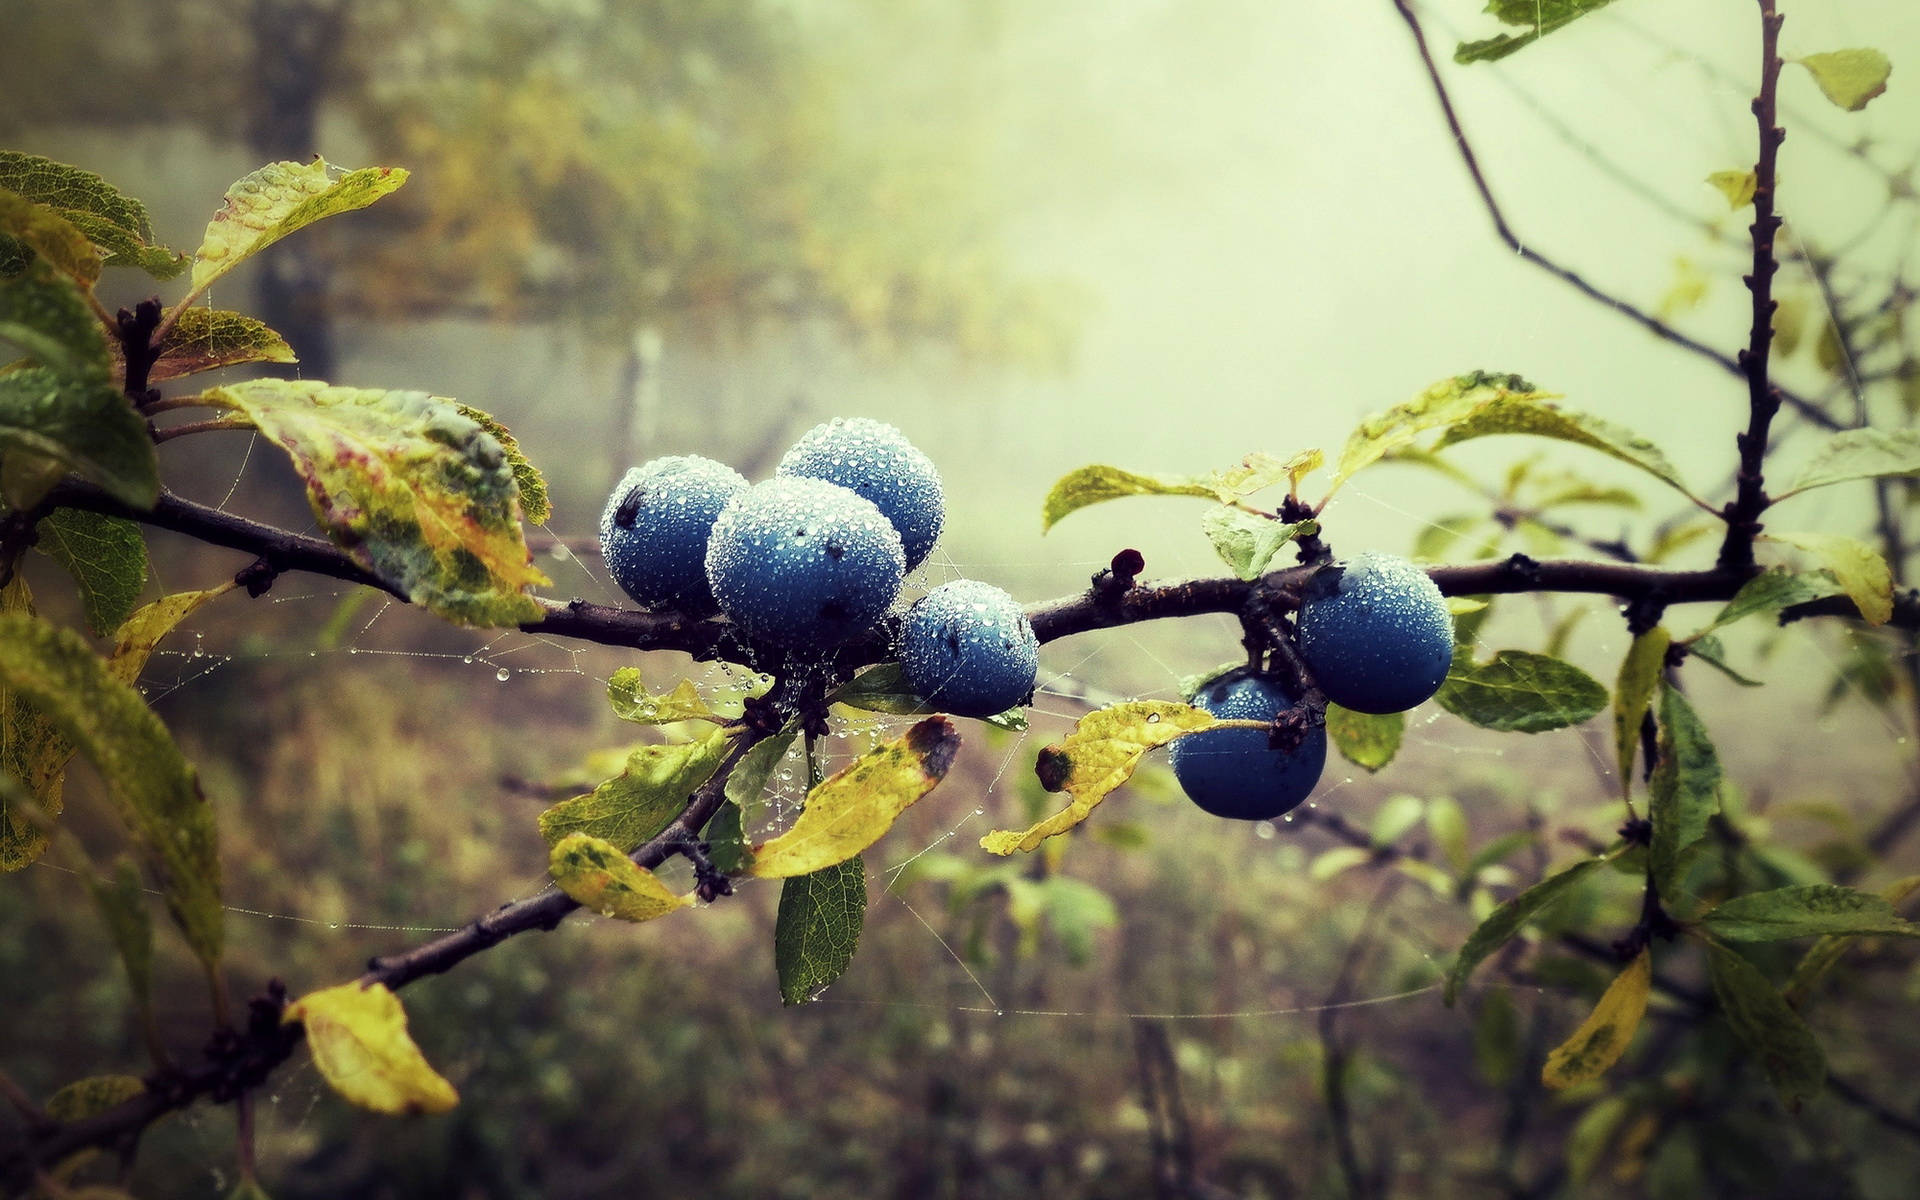 Wild Blueberries On Branches